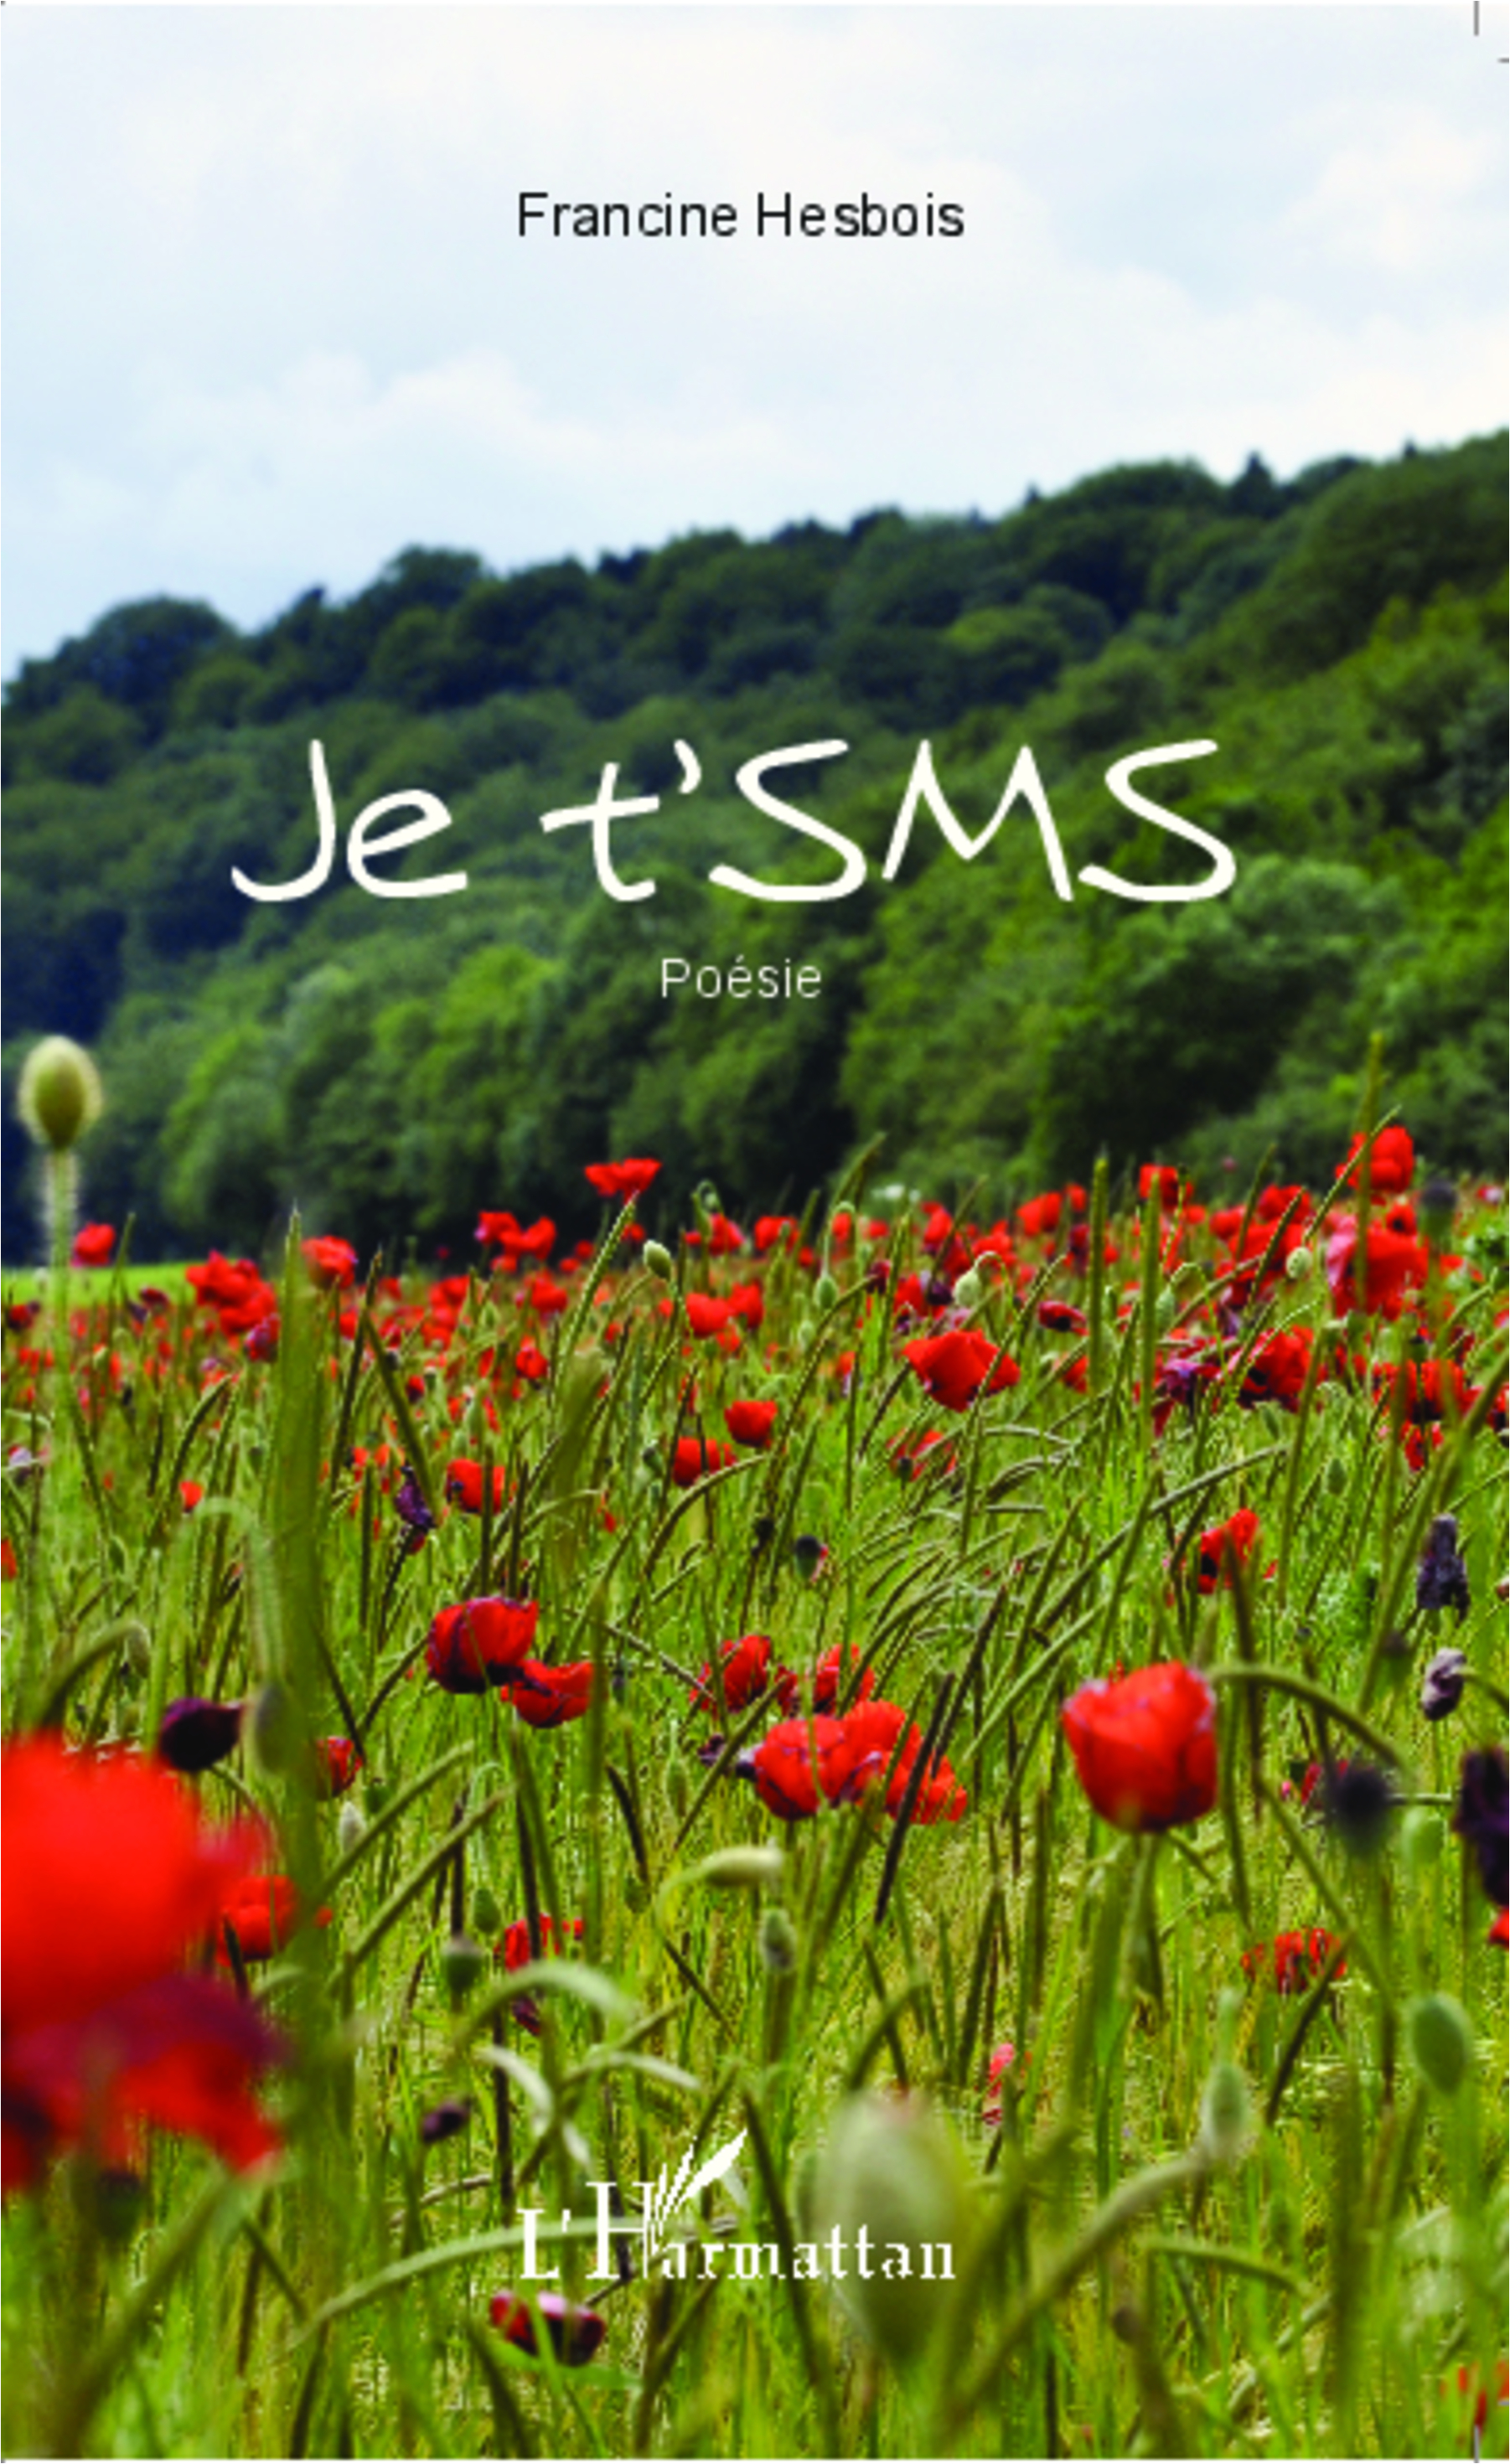 Je t'SMS (9782343019185-front-cover)